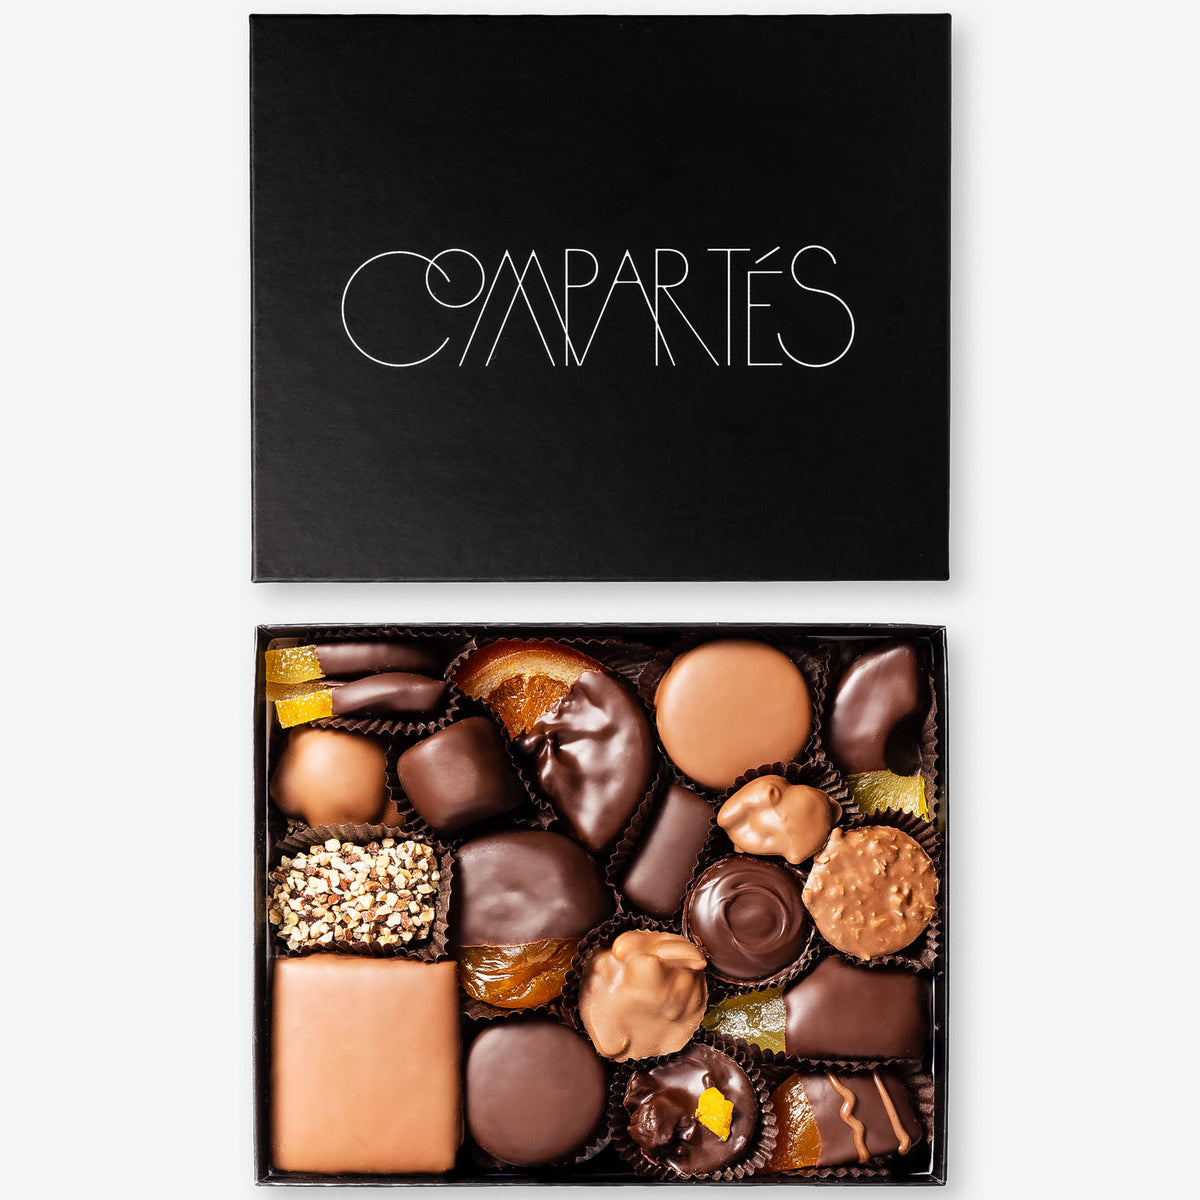 25 Best Chocolate Gifts and Sets 2022